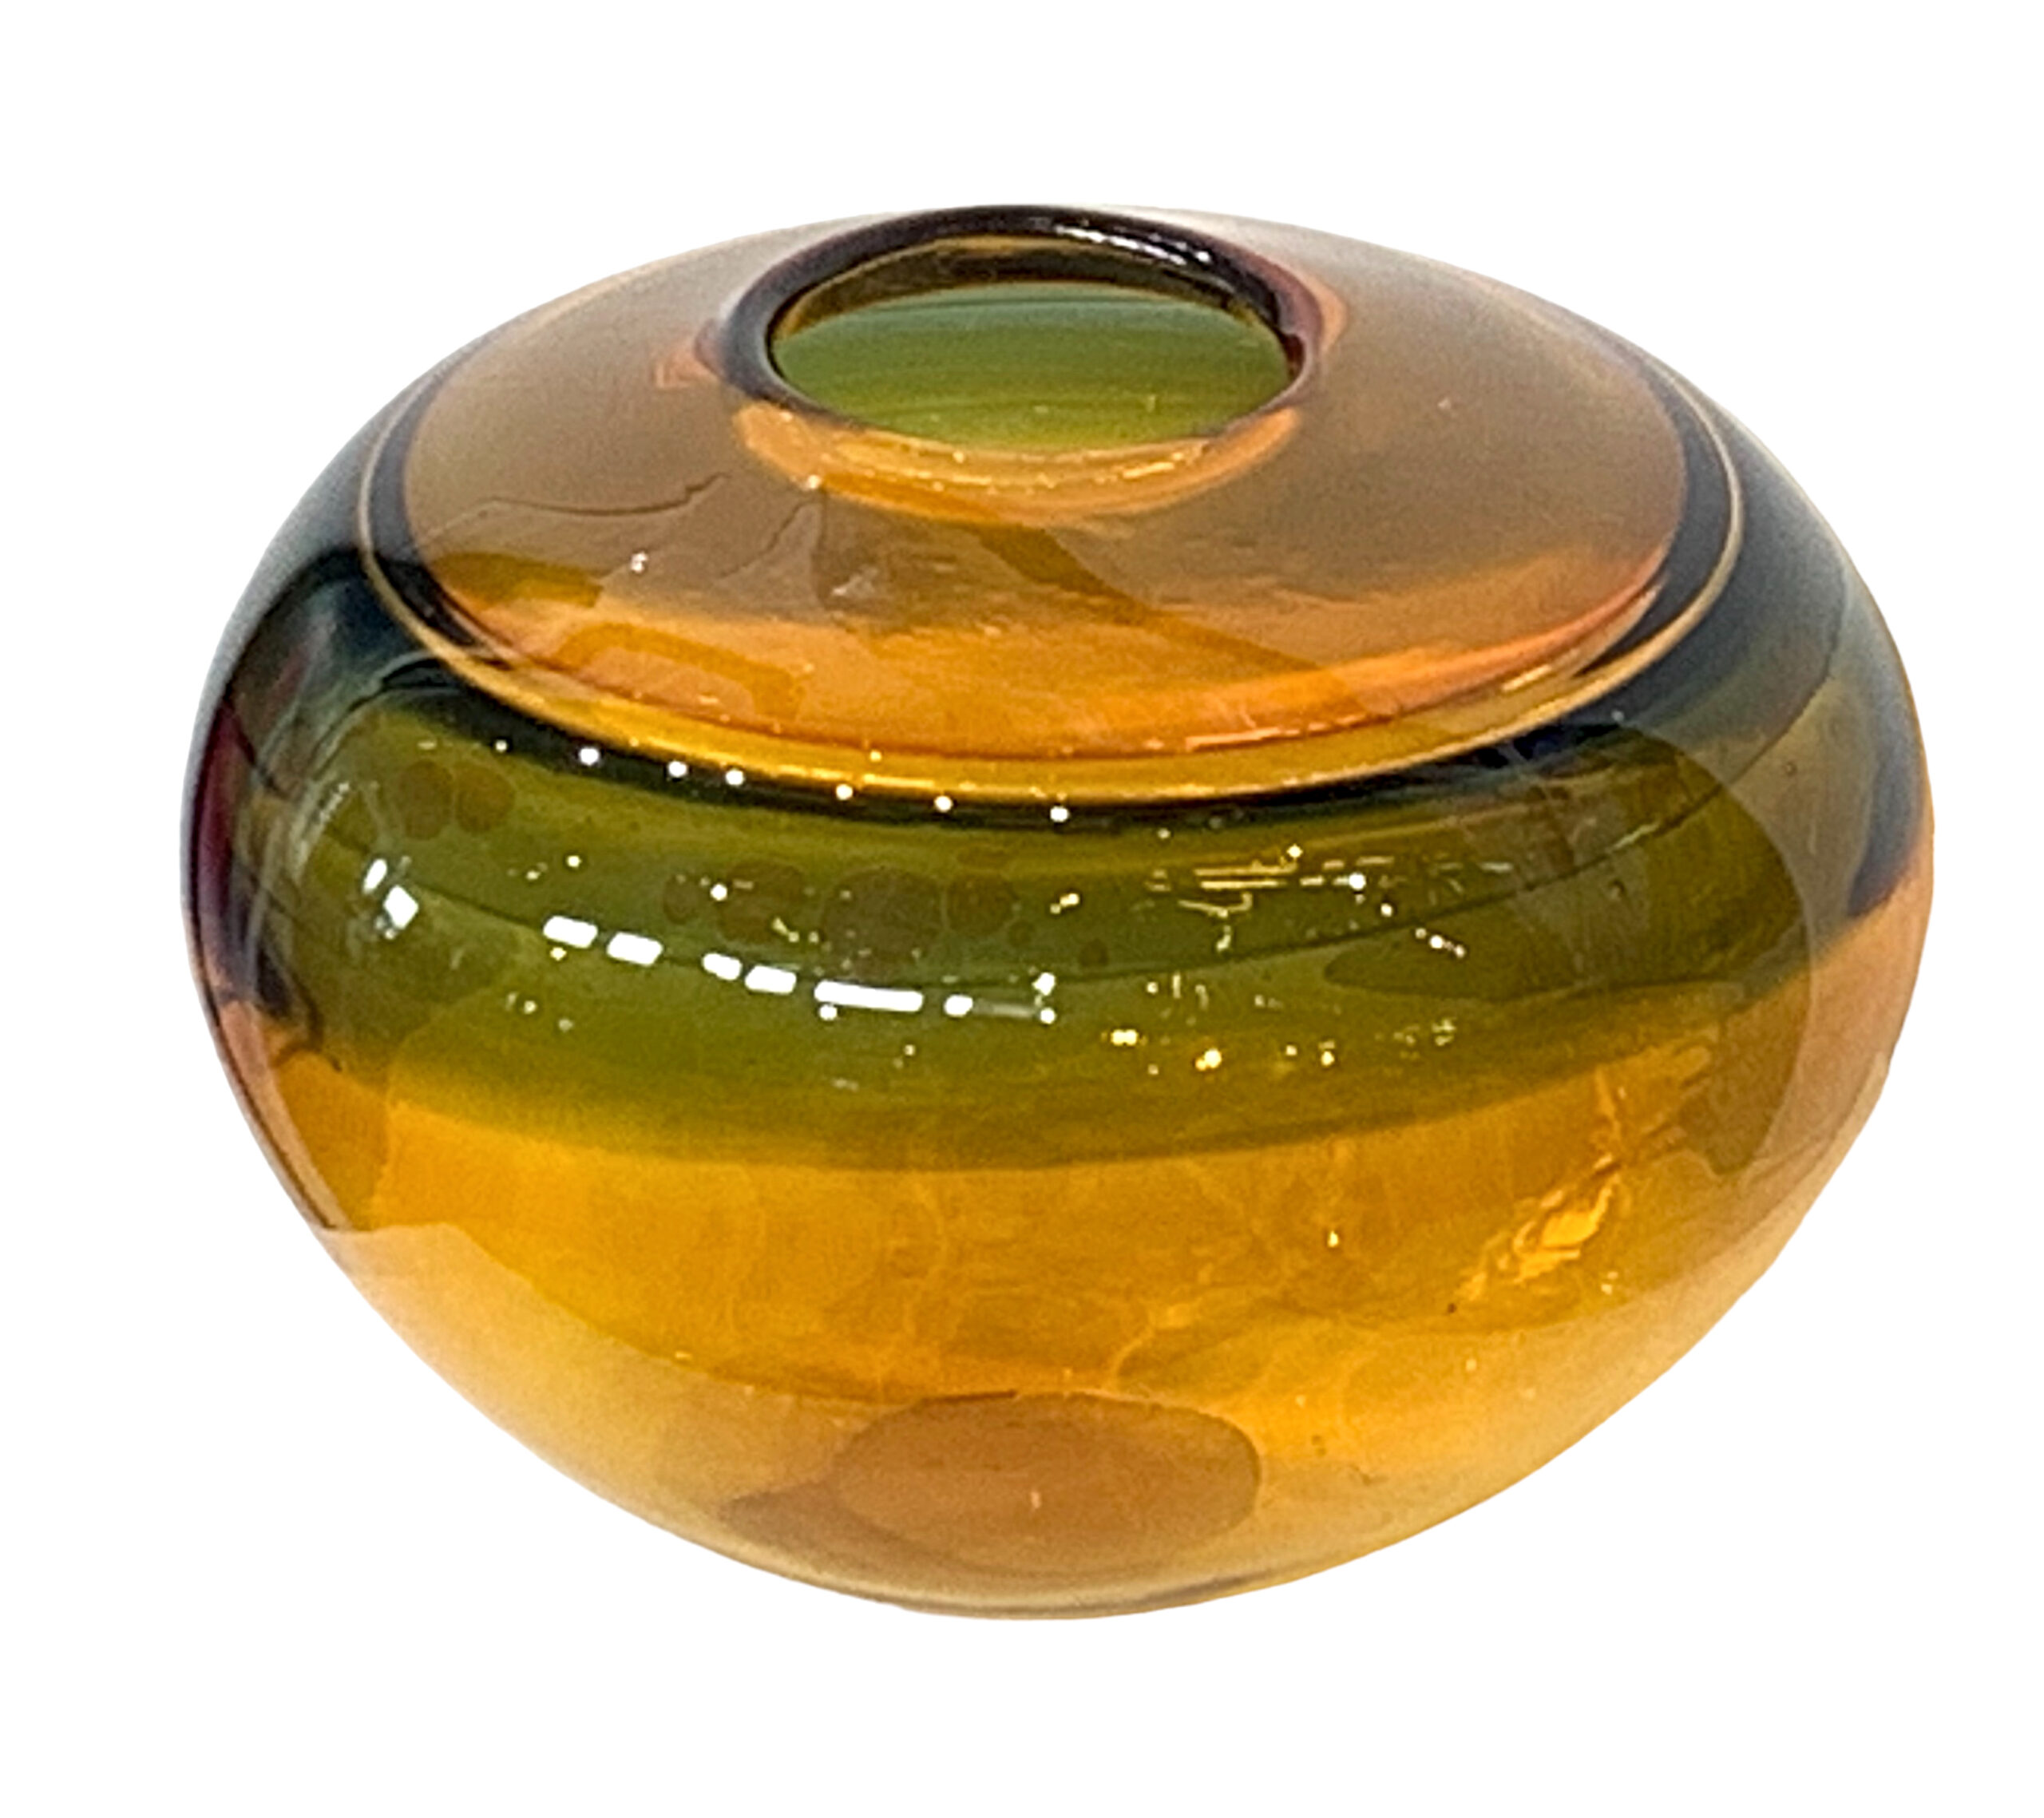 Honey Pot, One of a kind yellow + green blown glass bowl by Hayden MacRae at Effusion Art Gallery in Invermere, BC